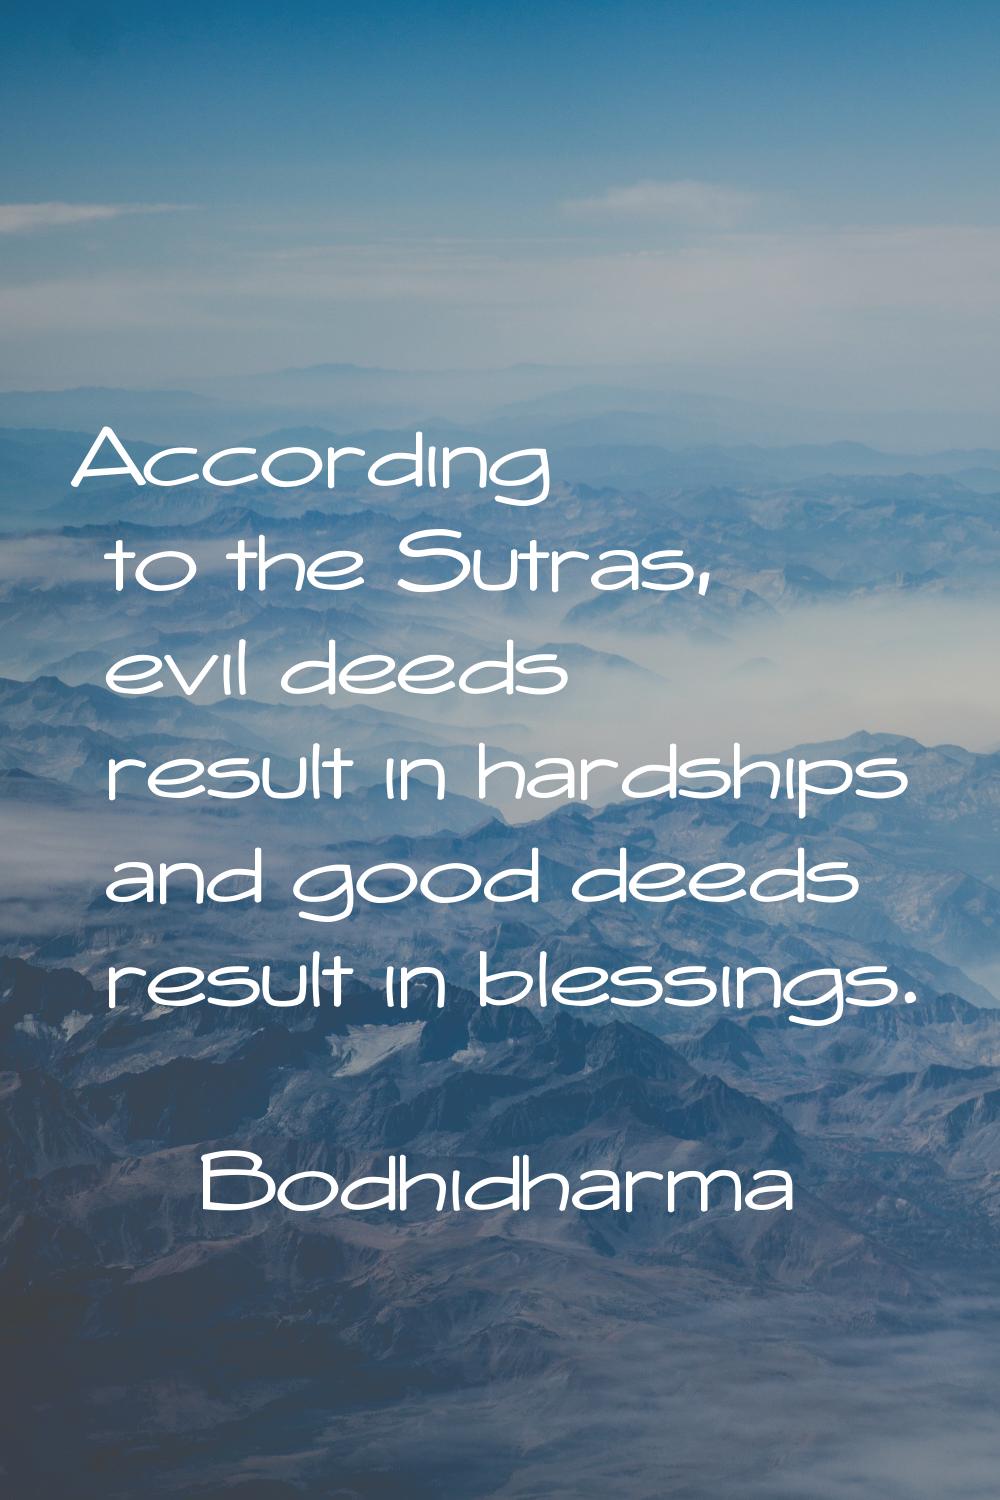 According to the Sutras, evil deeds result in hardships and good deeds result in blessings.